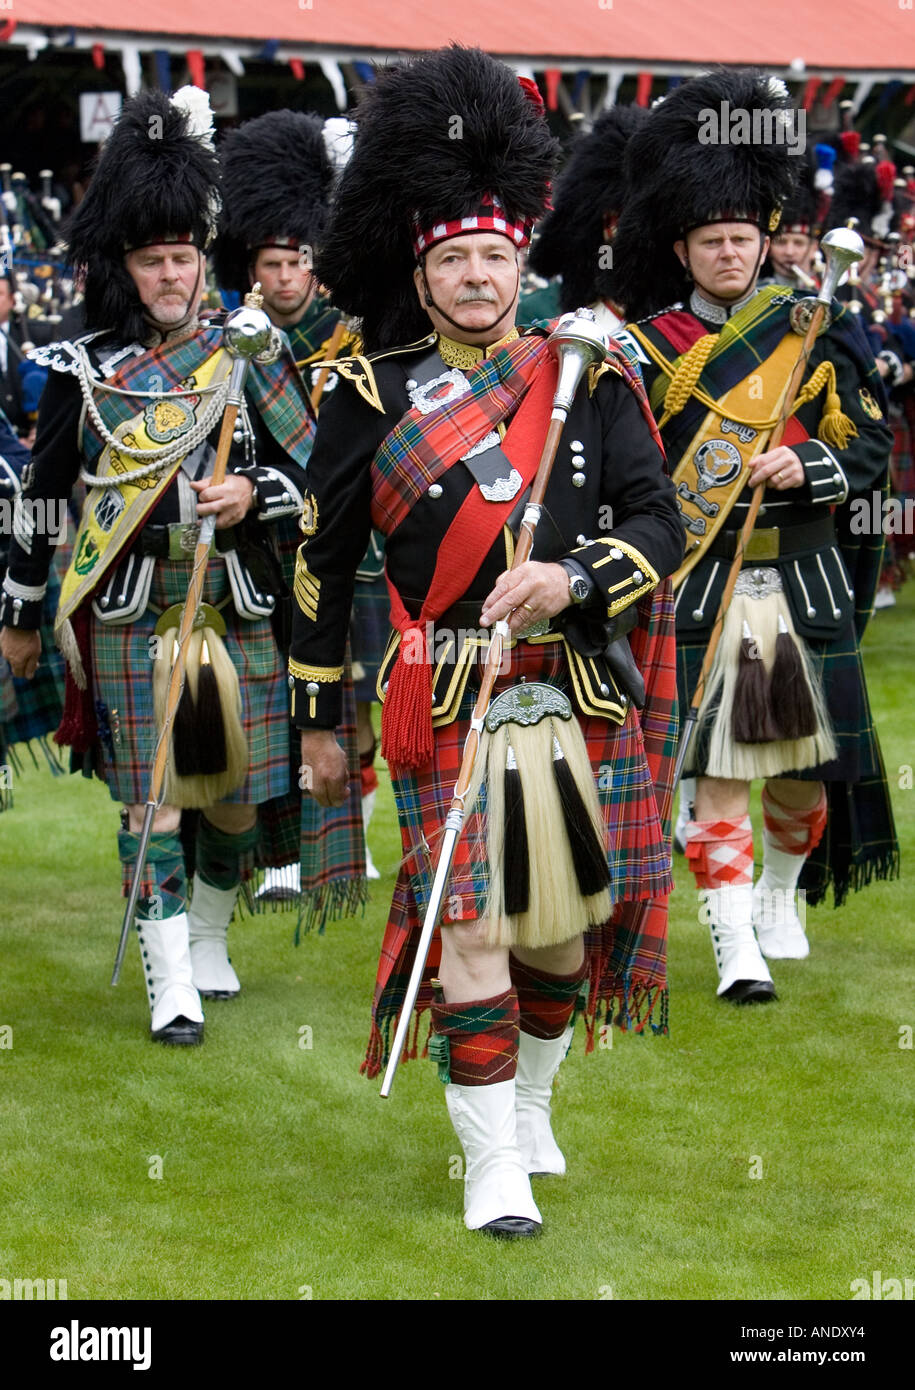 Drum Major leads band of Scottish pipers at Braemar Games Highland Gathering Scotland Stock Photo